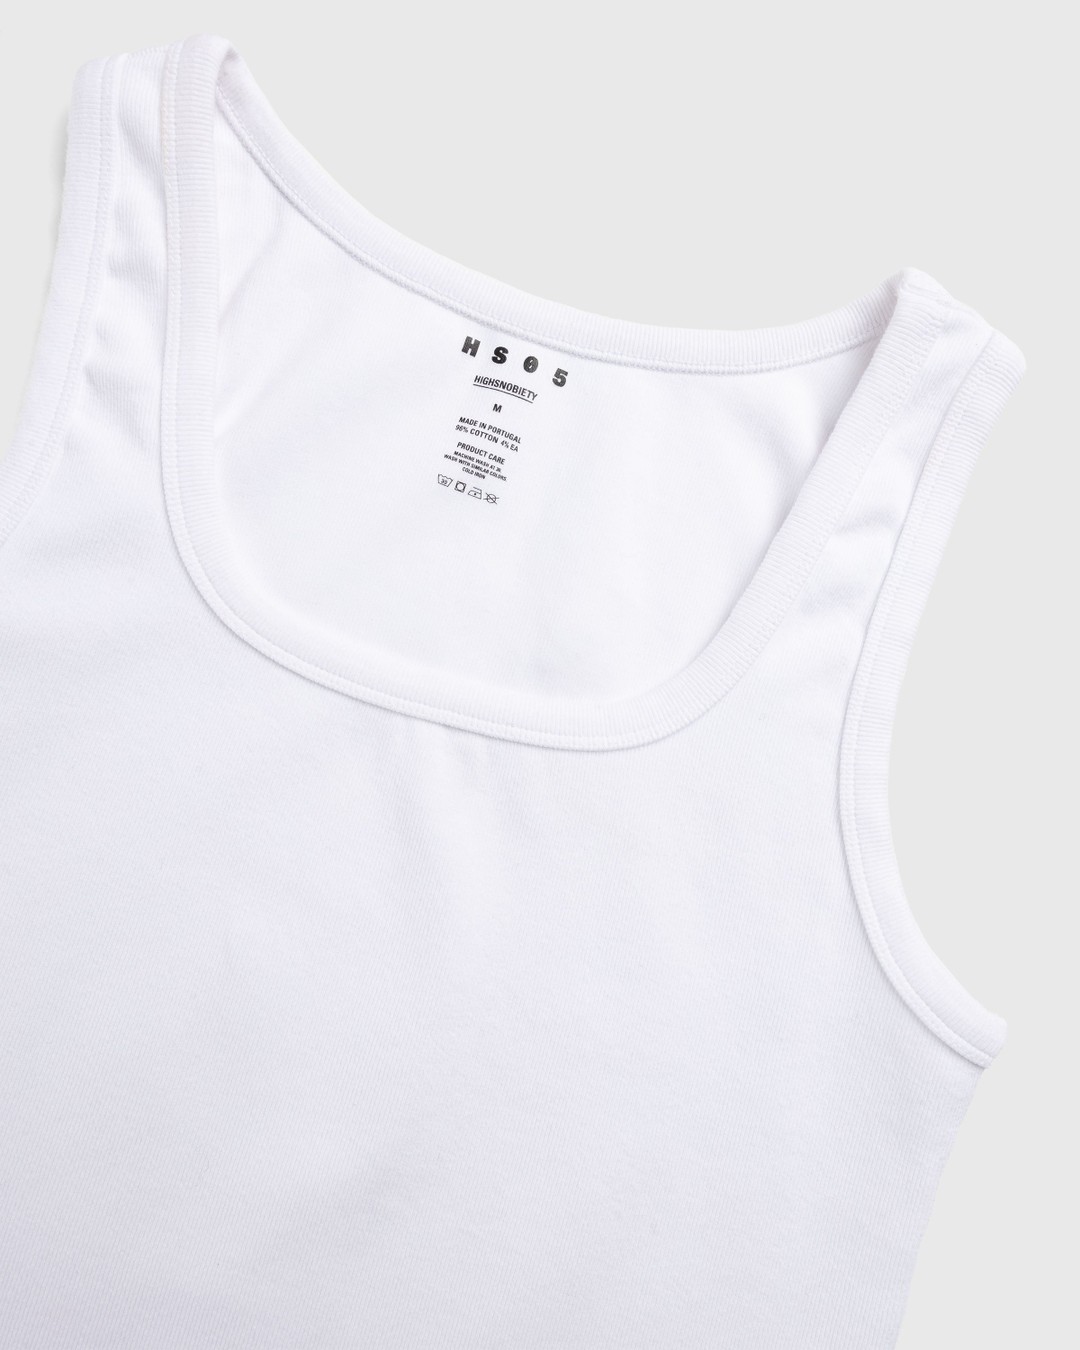 Highsnobiety HS05 – 3 Pack Heavyweight Tank Top White - Tops - White - Image 6